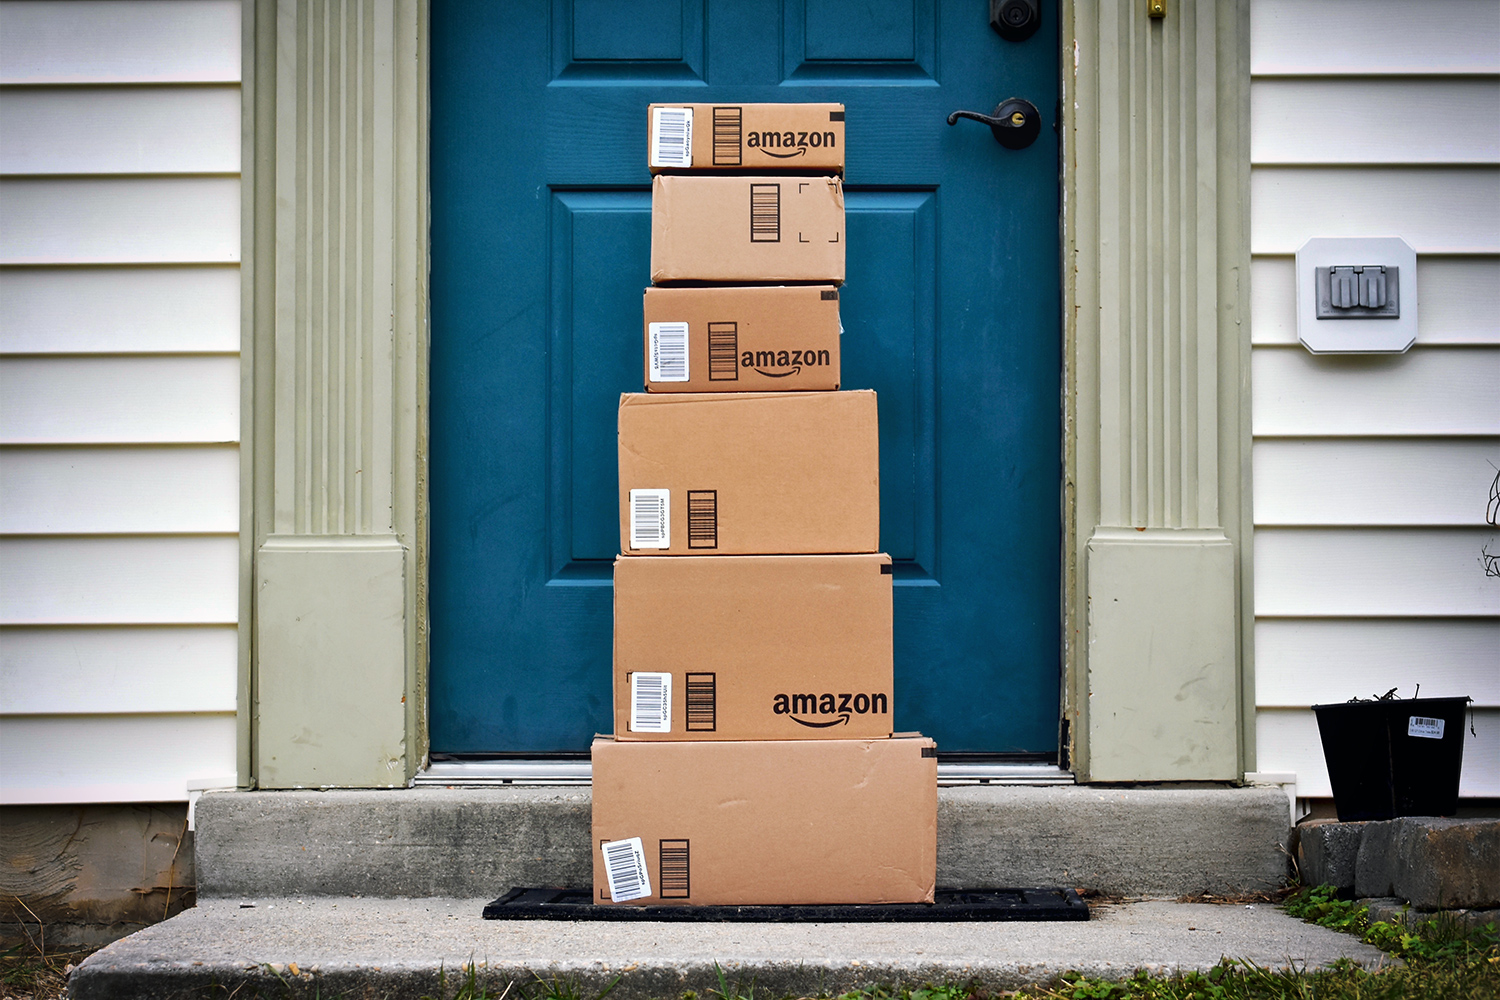 Amazon wants to deliver items to your car trunk and inside your house